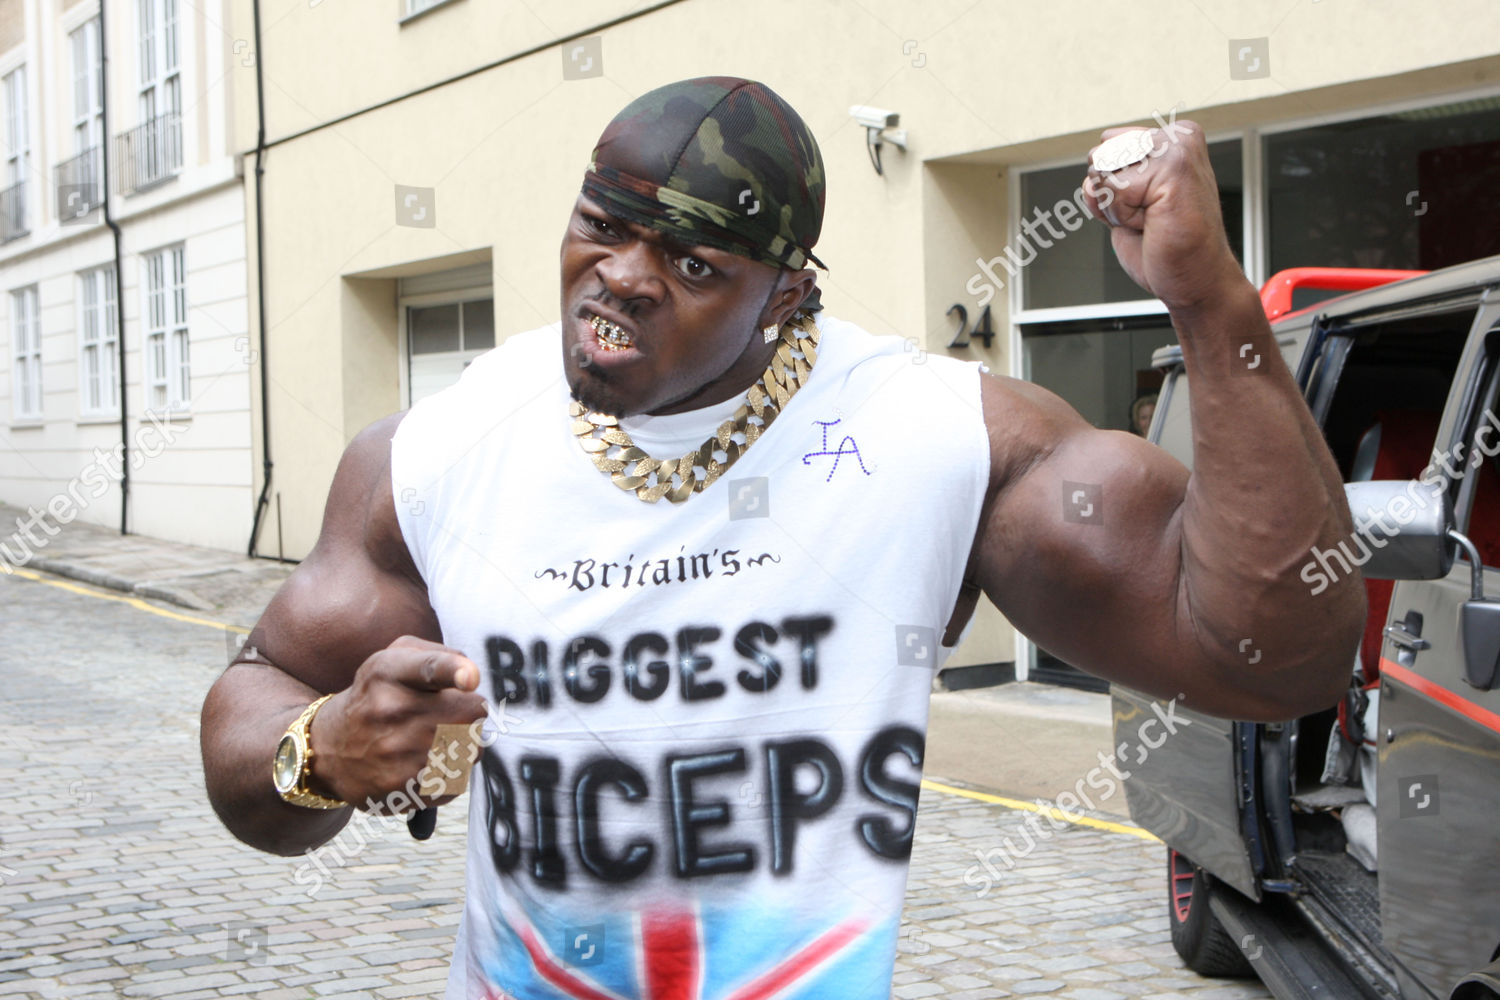 Tiny Iron is the bodybuilder with Britain's biggest biceps - Daily Star